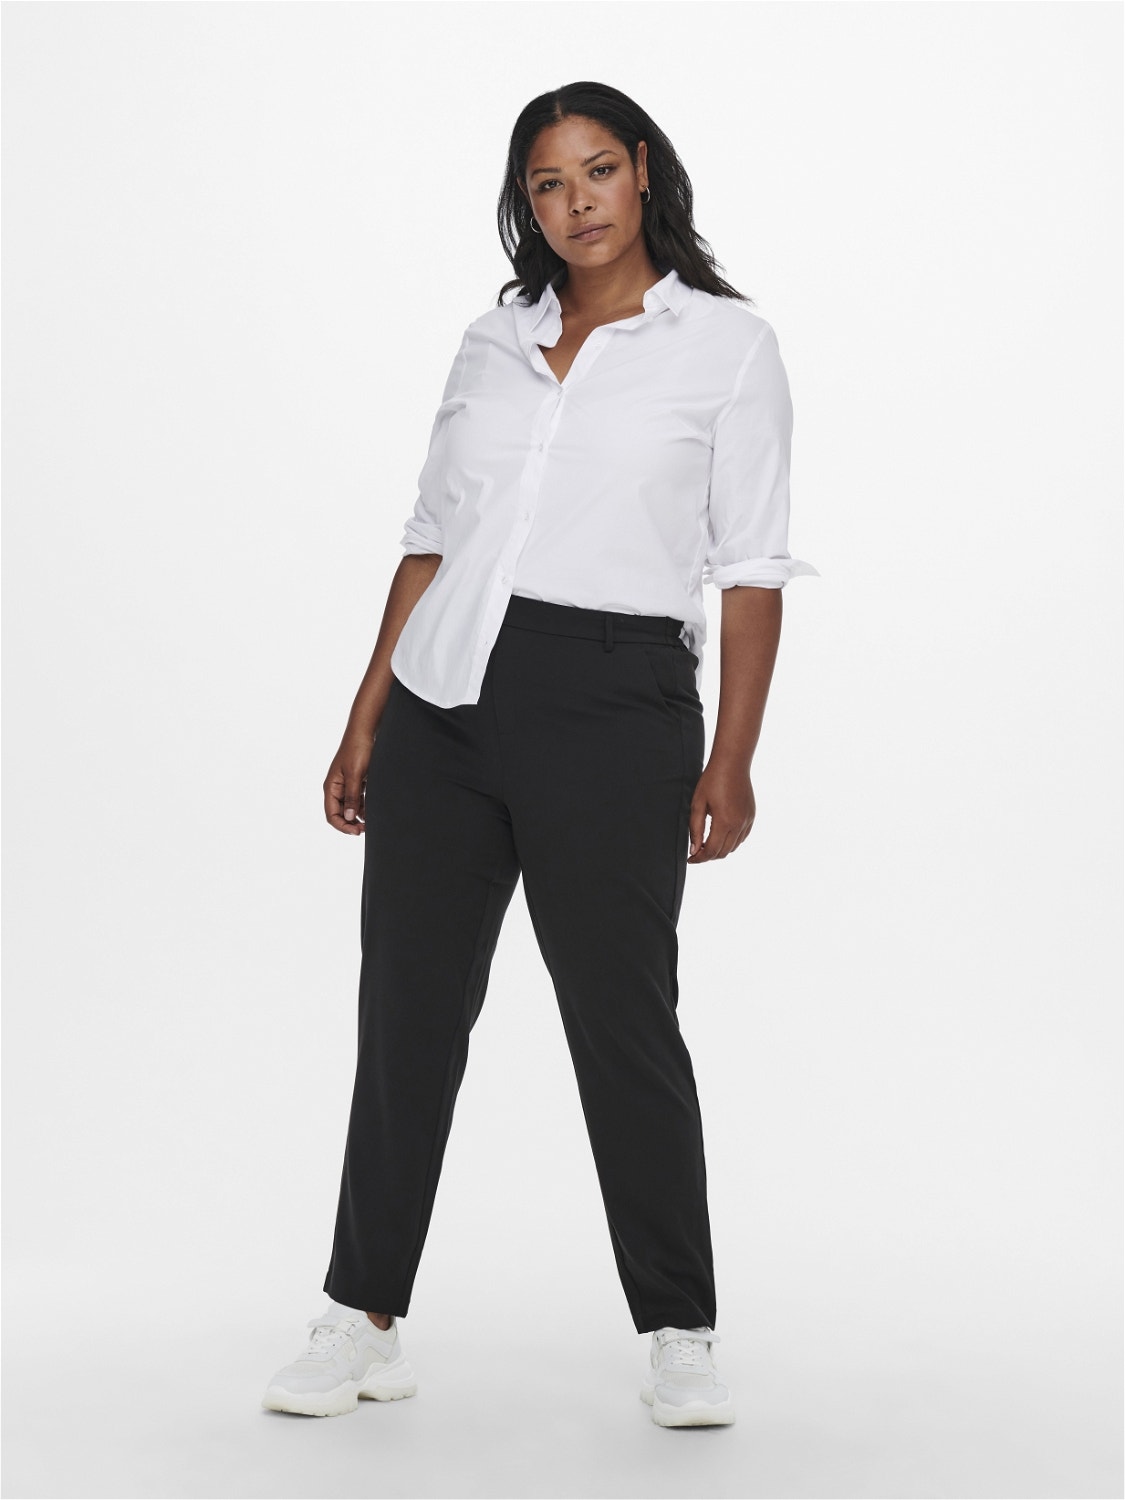 ONLY Regular Fit Trousers -Black - 15239373